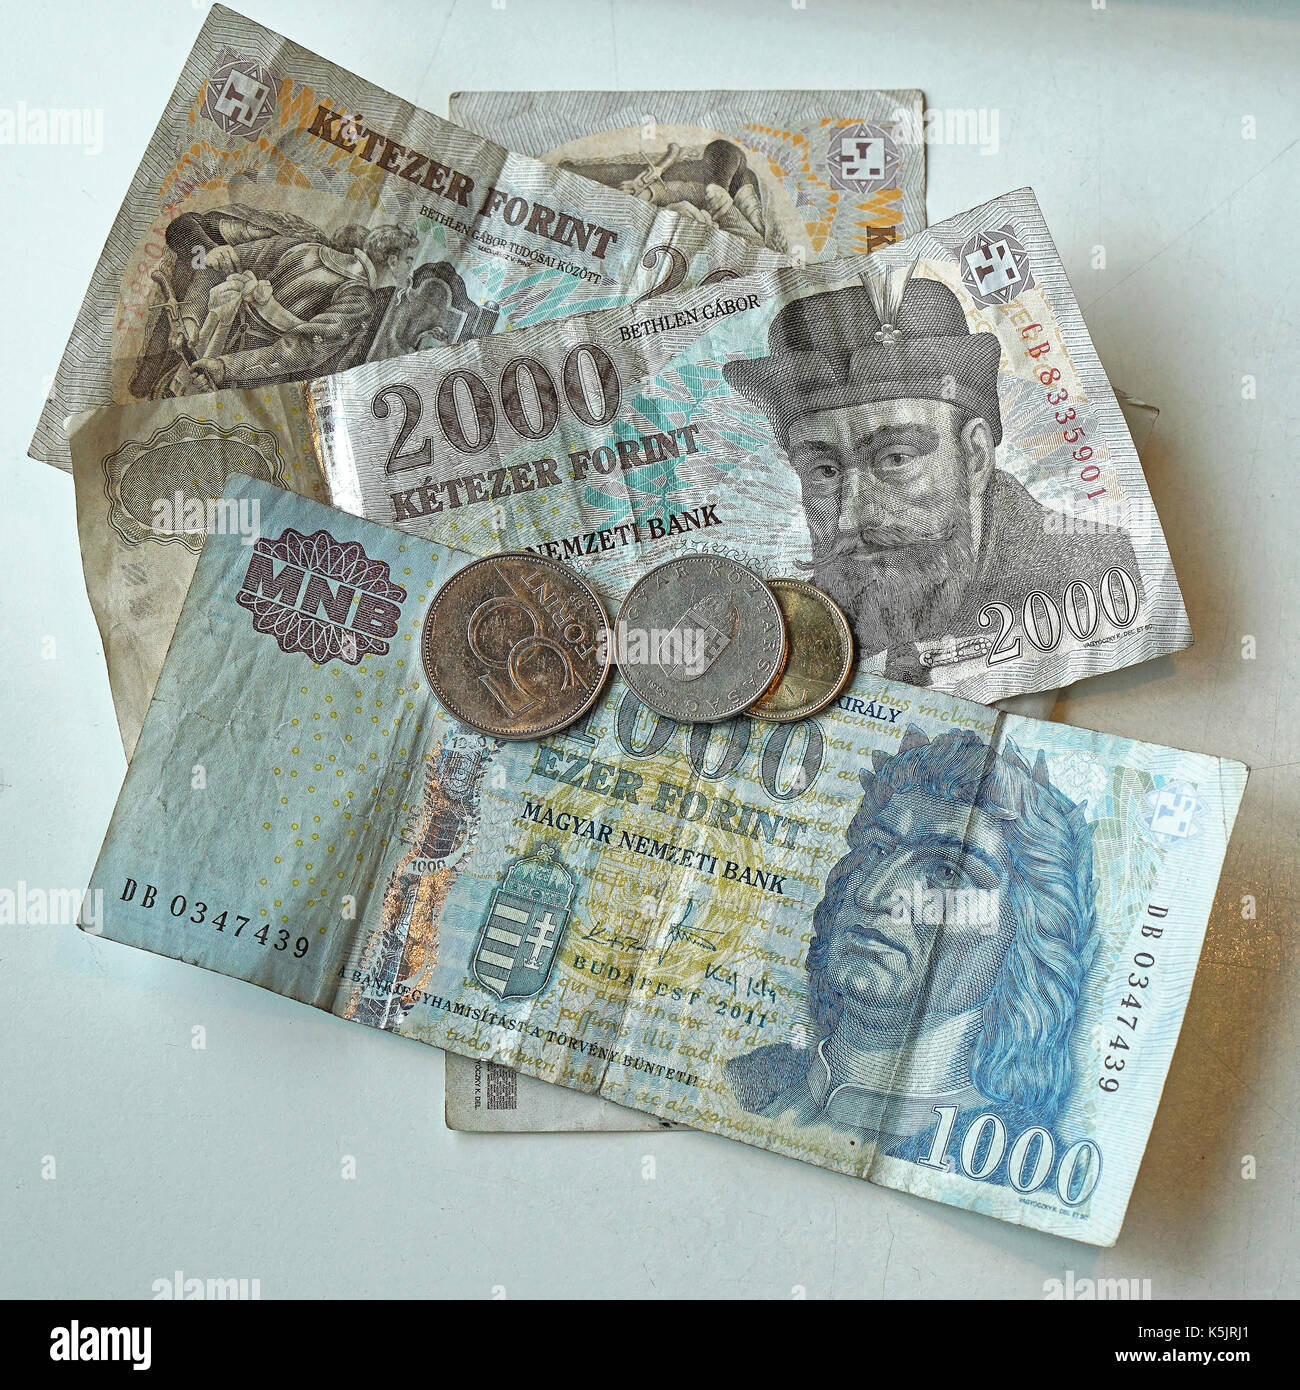 BUDAPEST, HUNGARY - JULY 13, 2015: Pile of Hungarian Forints at table. Stock Photo